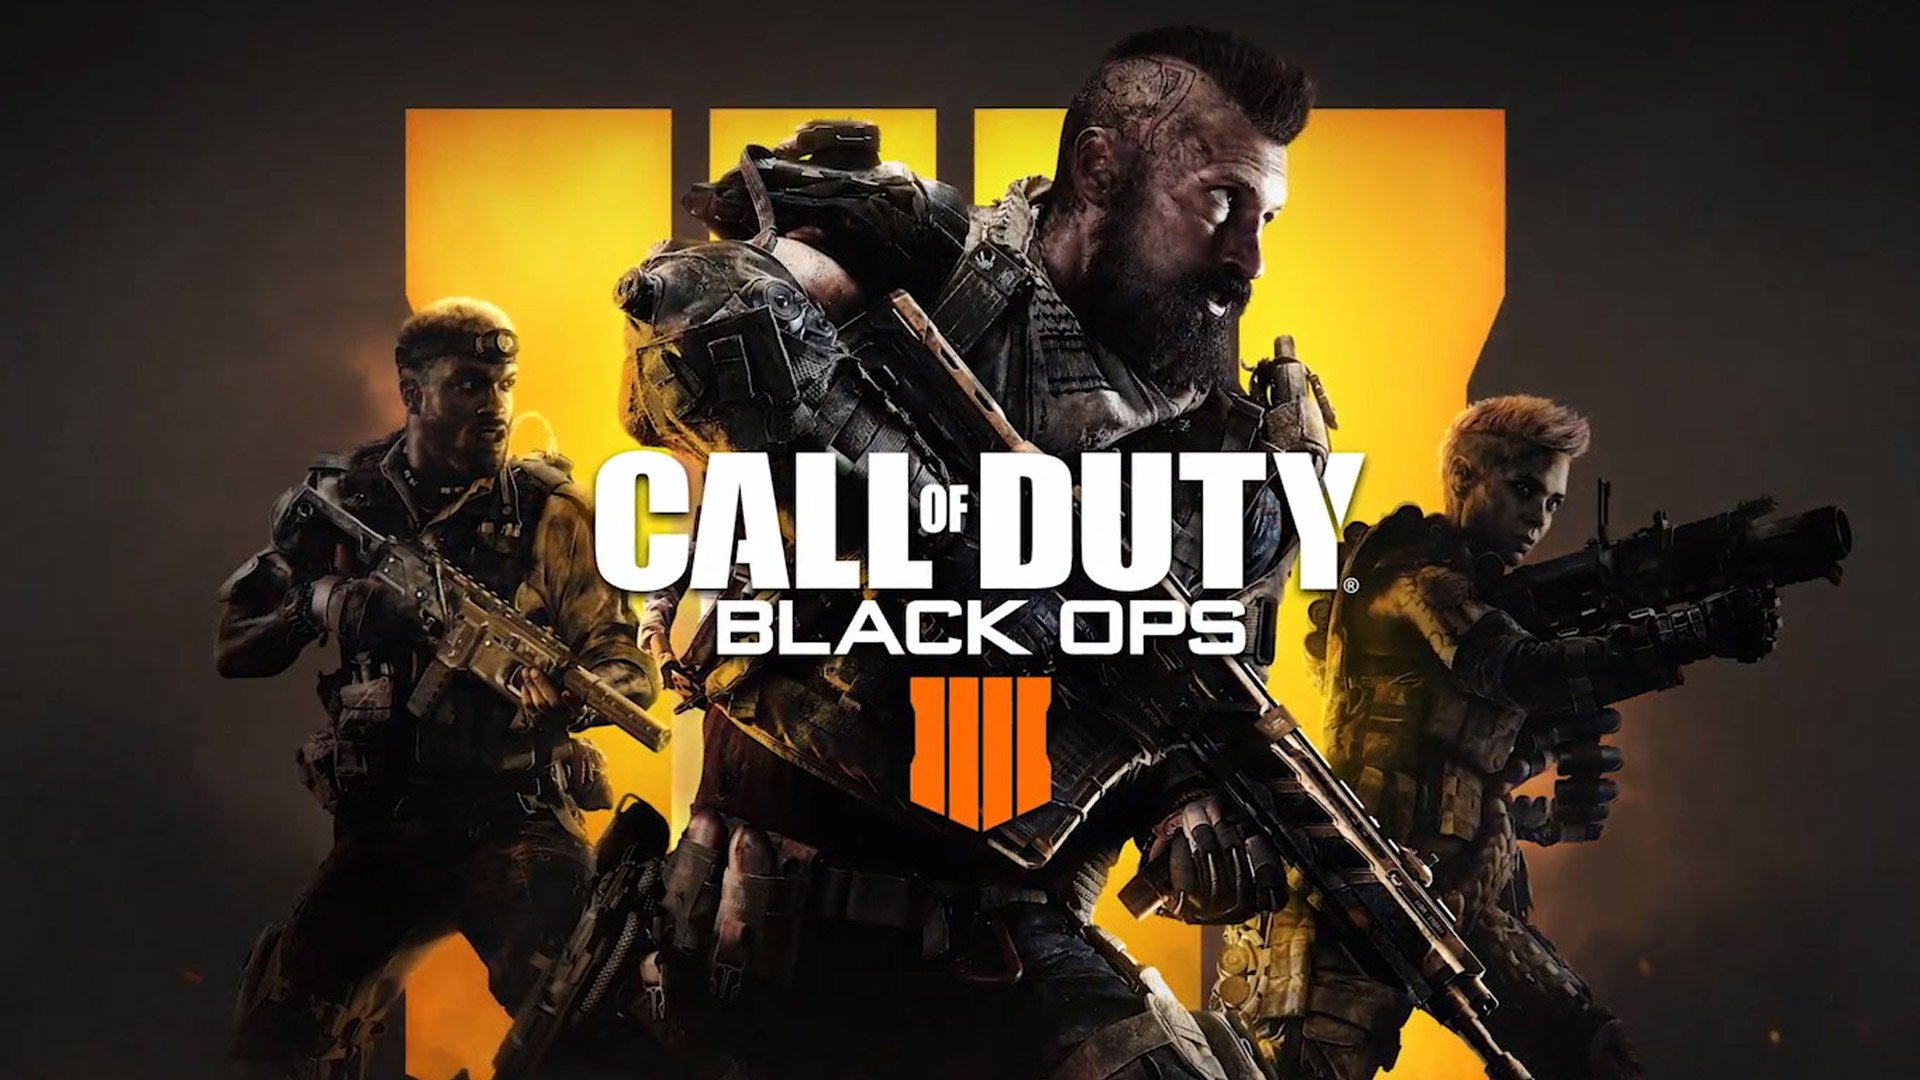 Download Call of Duty Black Ops 4 2 Wallpapers | Wallpapers HD